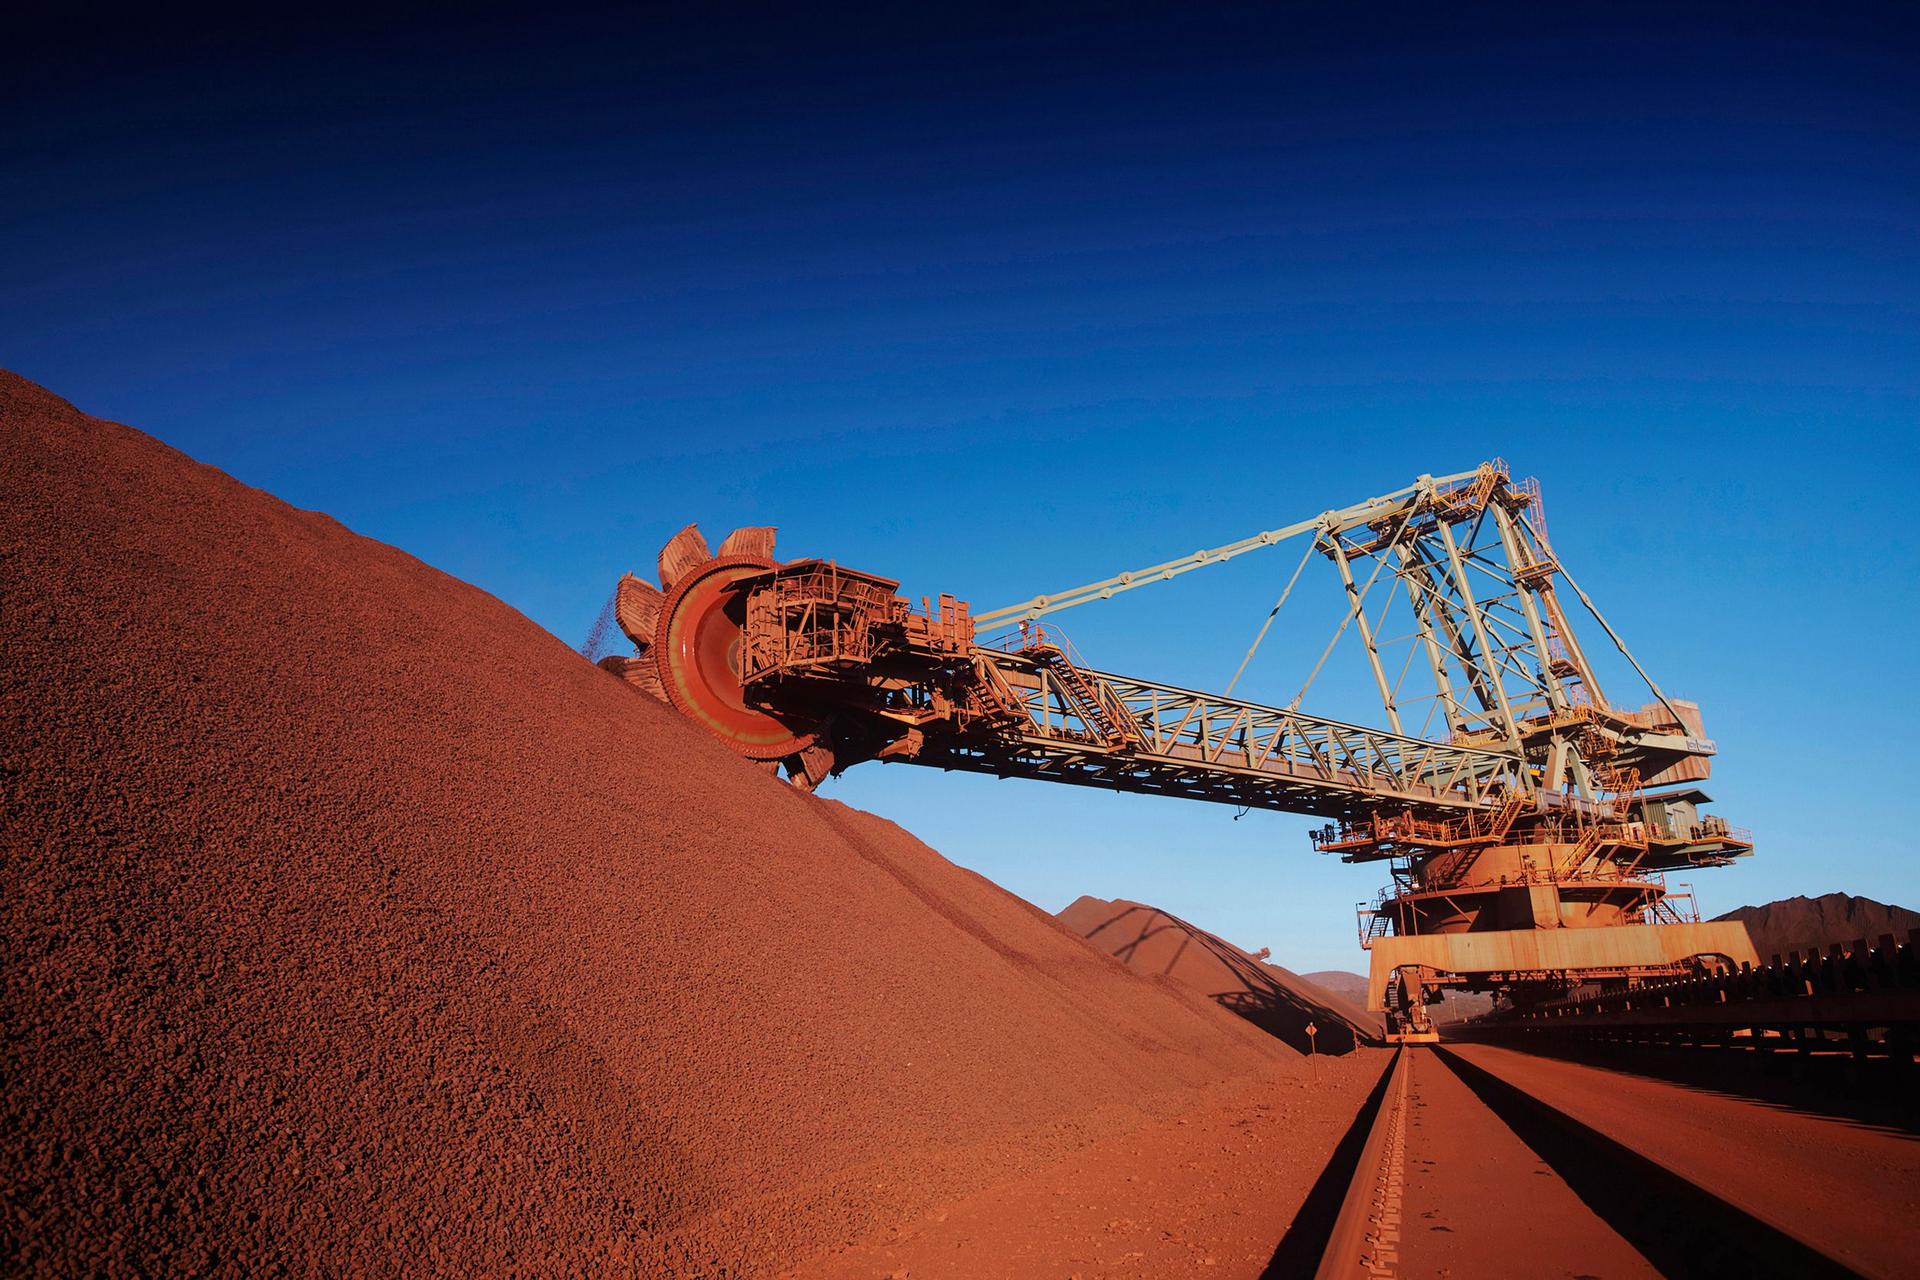 Iron ore prices have dropped more than 30 per cent this year because of slowing demand growth in China.